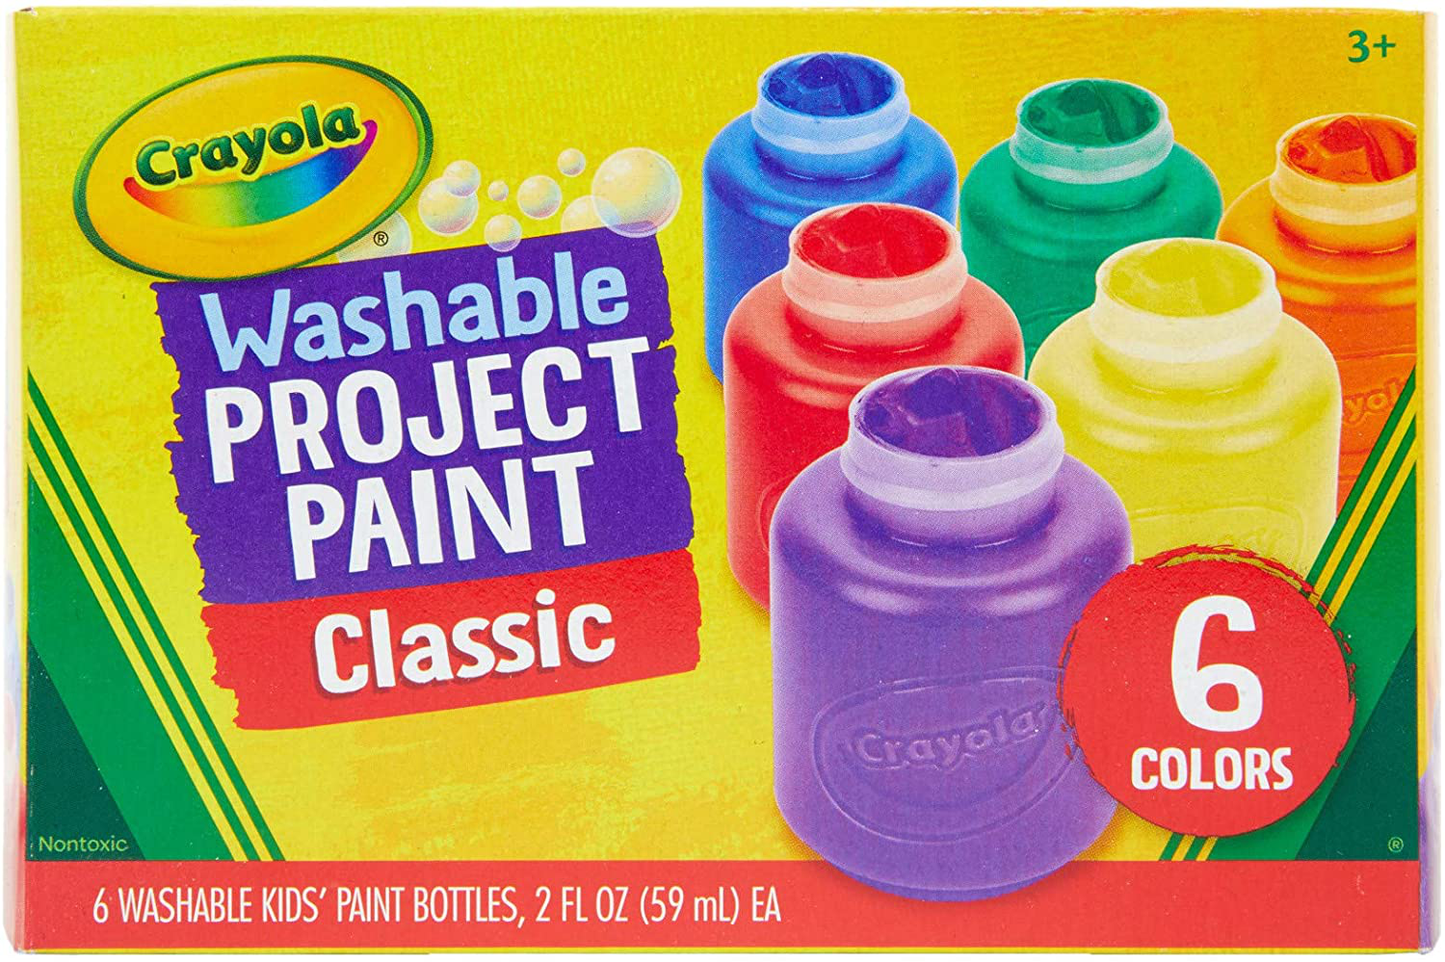 Crayola Washable Kids Paint, 6 Count, Kids At Home Activities, Painting Supplies, Gift, Assorted